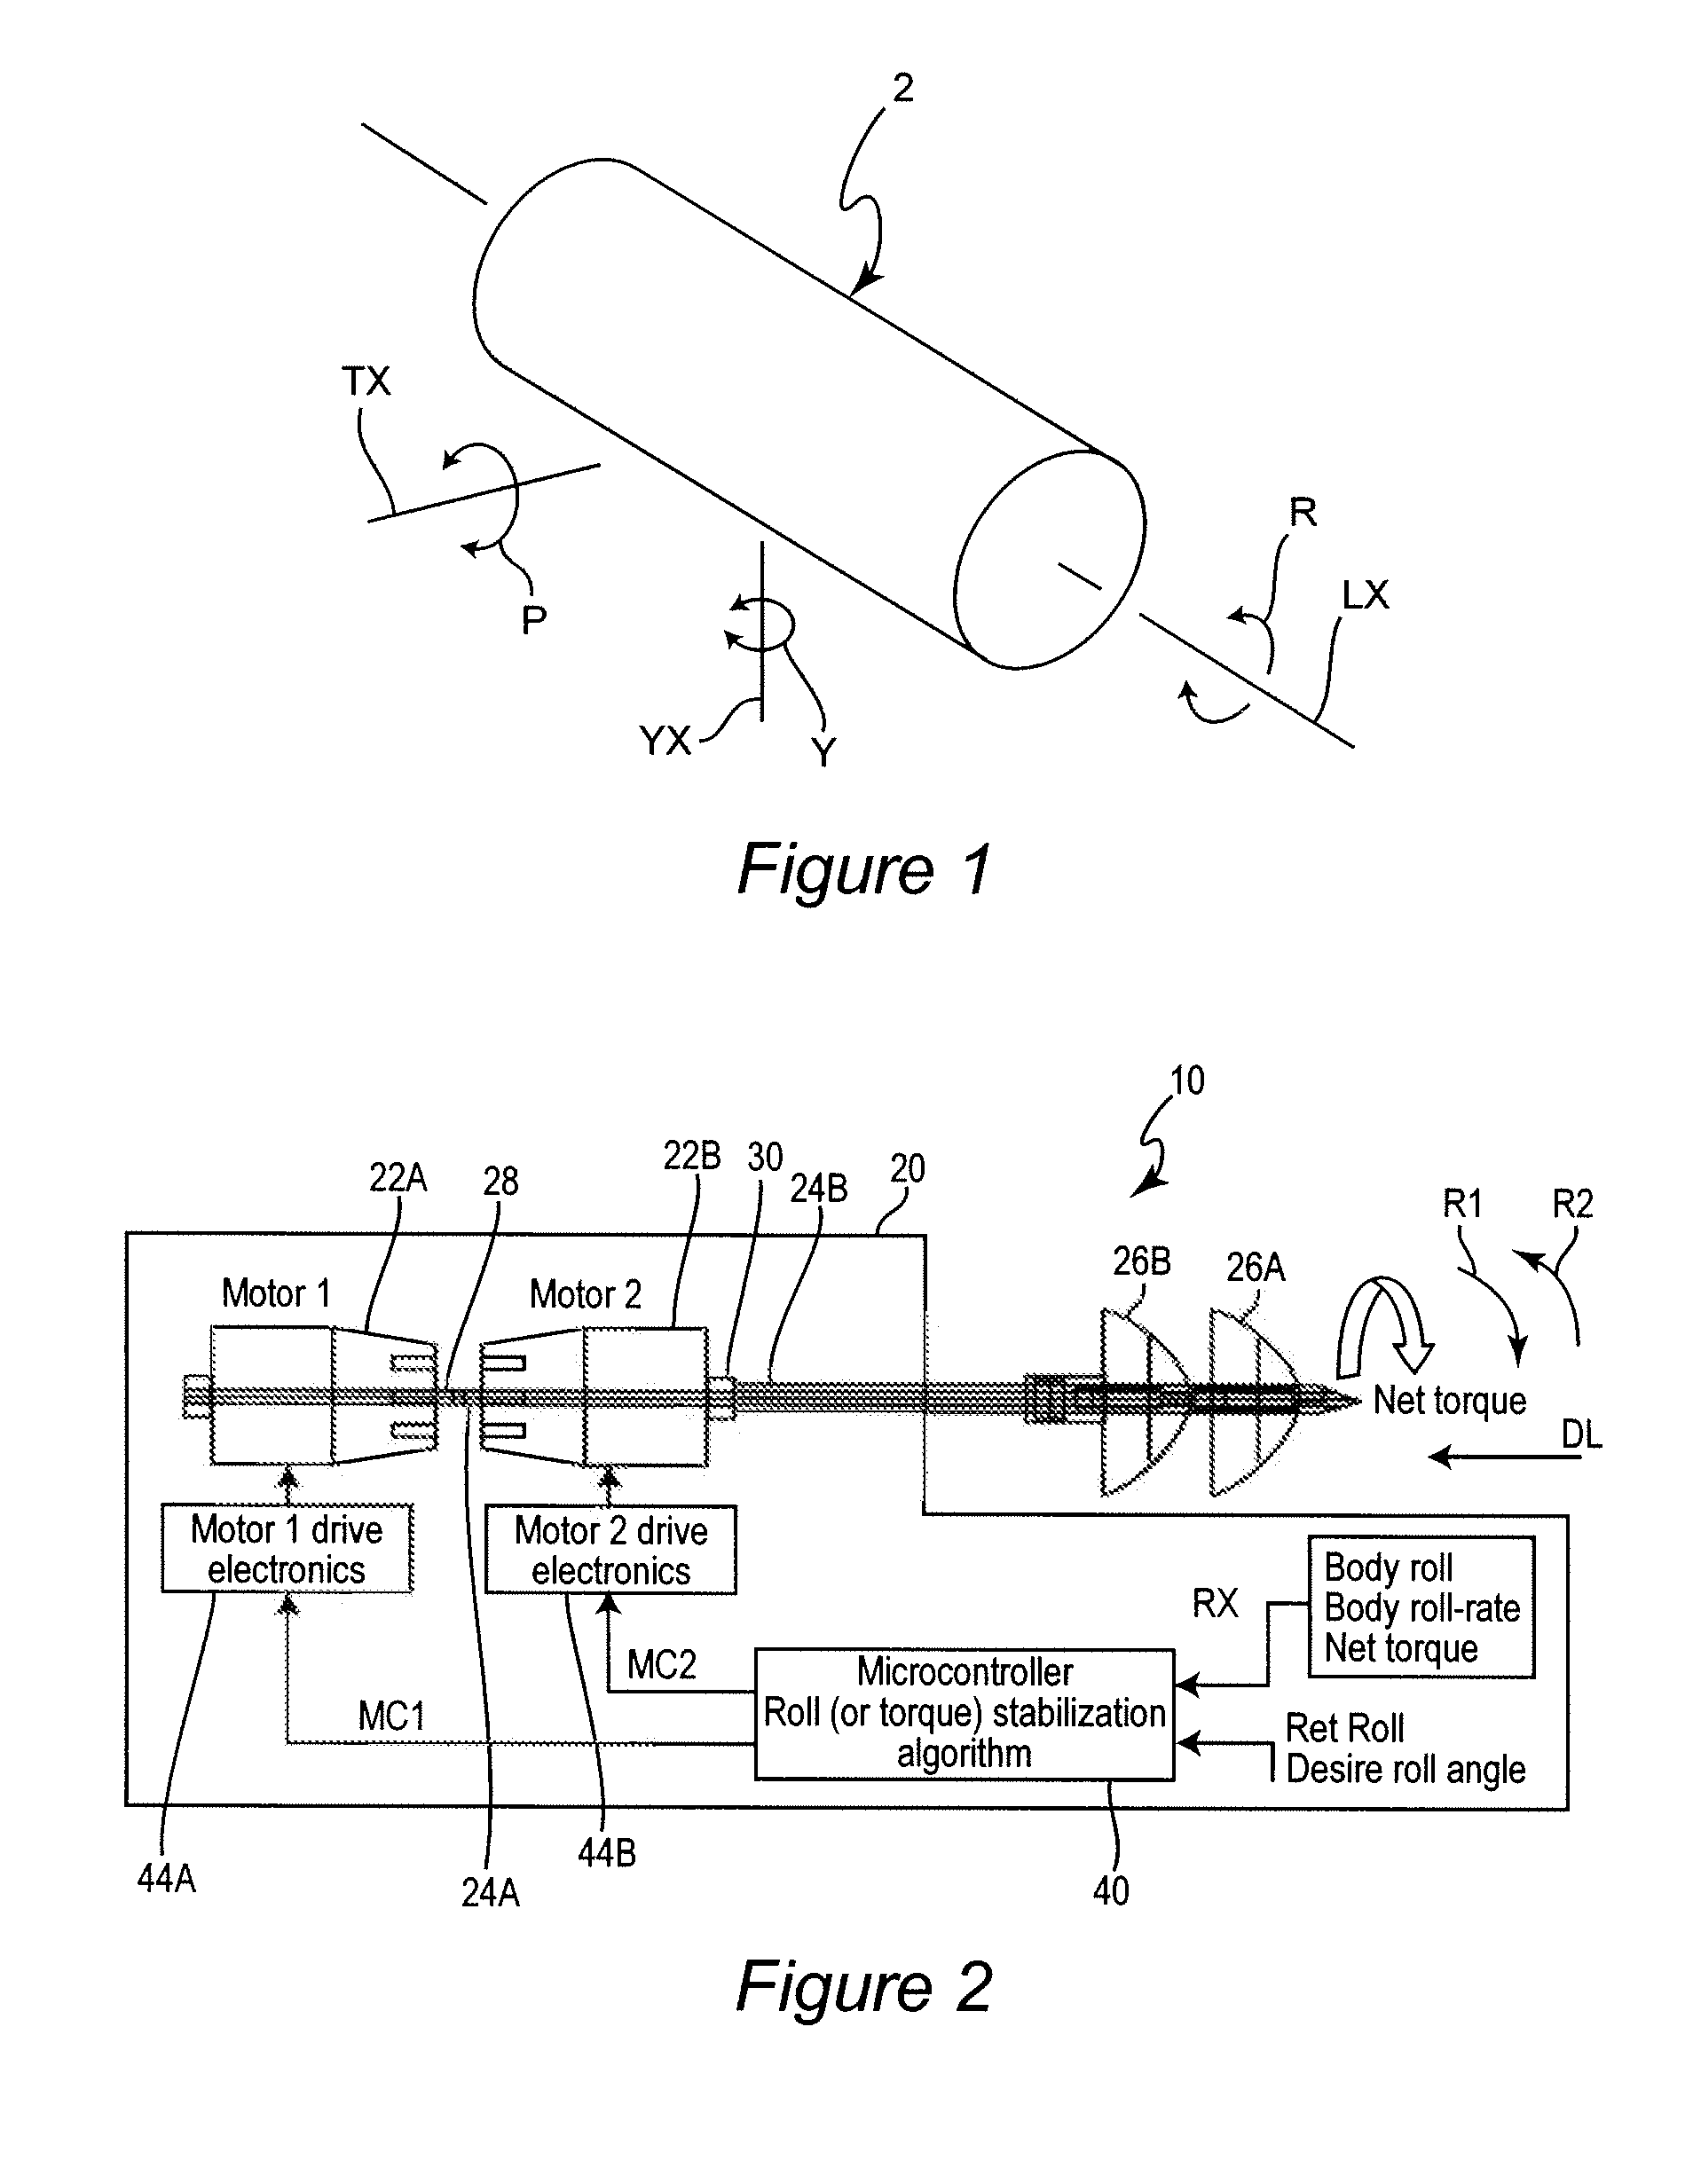 Method and apparatus for torque control for machinery using counter-rotating drives